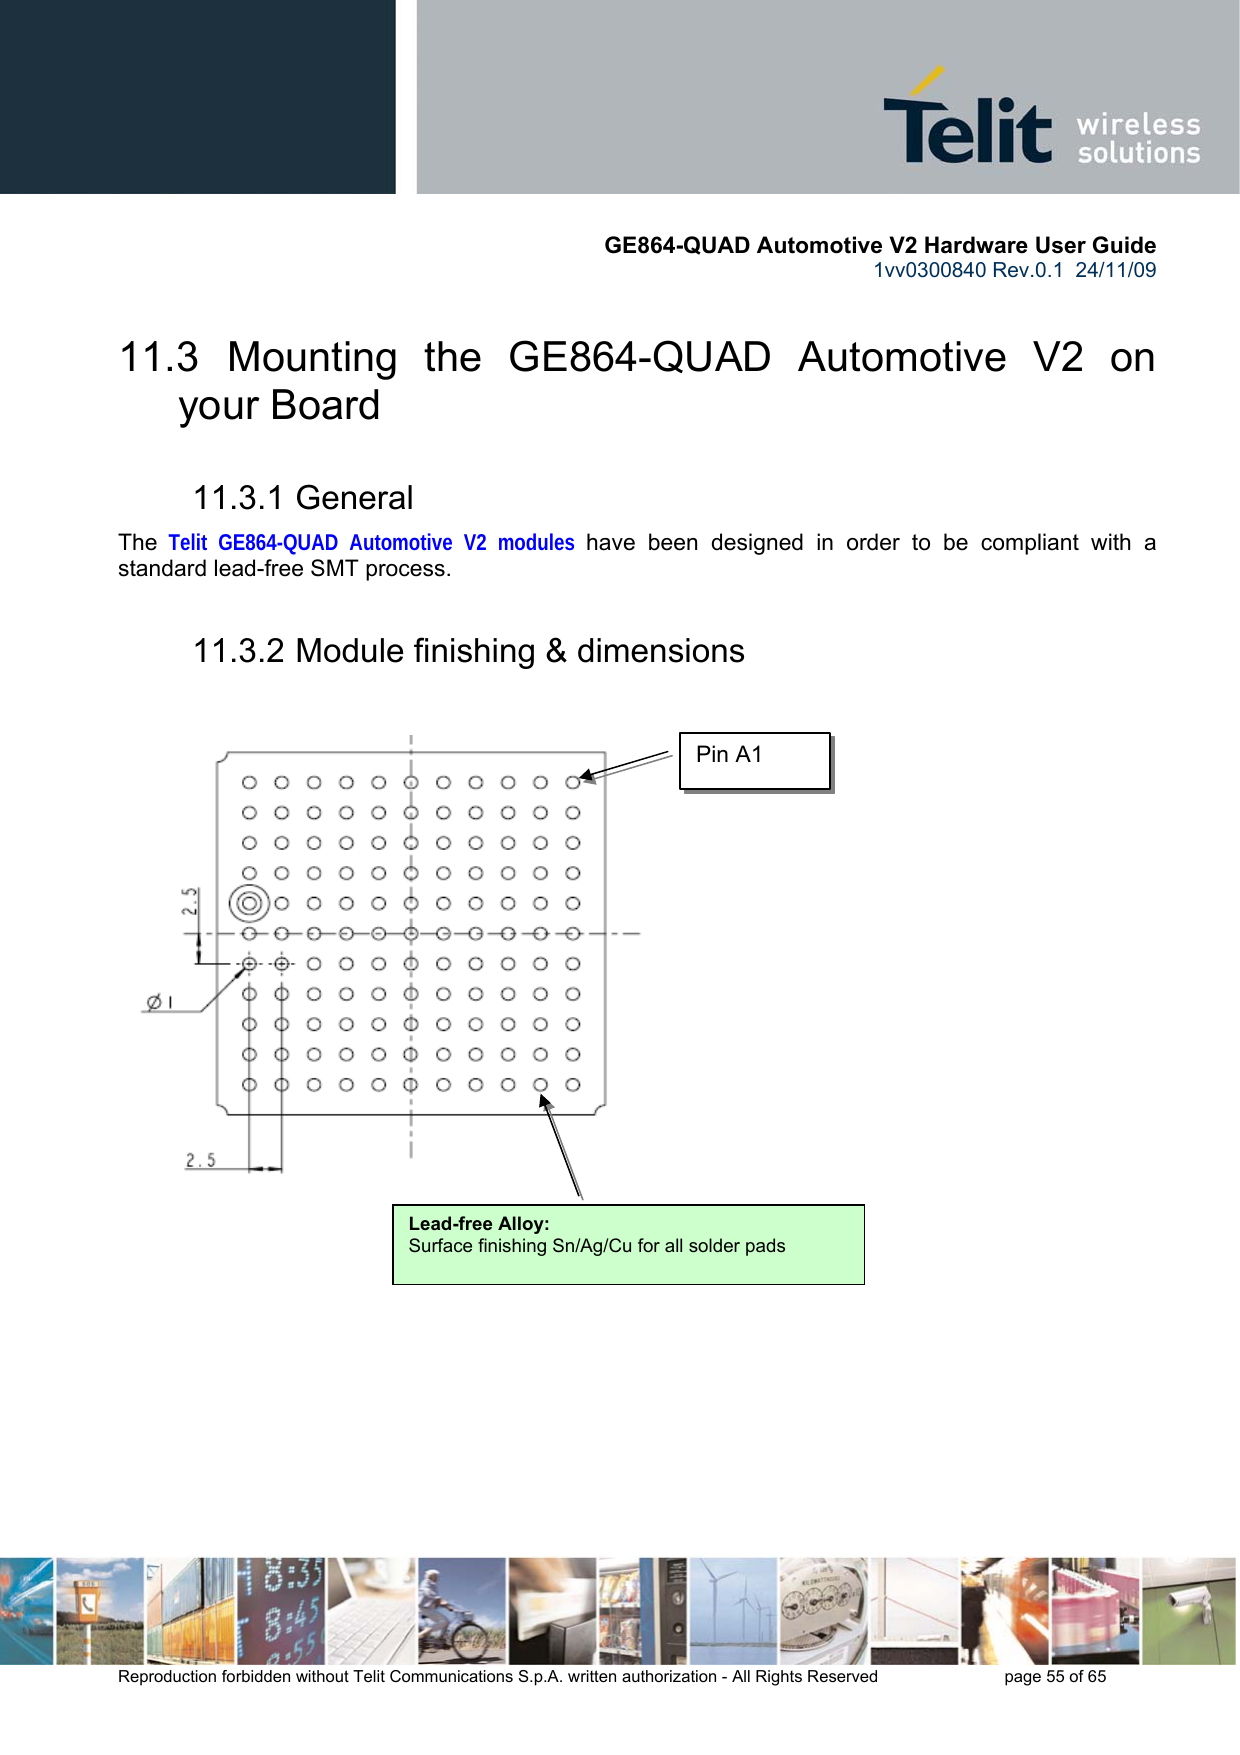       GE864-QUAD Automotive V2 Hardware User Guide 1vv0300840 Rev.0.1  24/11/09      Reproduction forbidden without Telit Communications S.p.A. written authorization - All Rights Reserved    page 55 of 65  11.3  Mounting the GE864-QUAD Automotive V2 on your Board 11.3.1 General The Telit GE864-QUAD Automotive V2 modules have been designed in order to be compliant with a standard lead-free SMT process. 11.3.2 Module finishing &amp; dimensions                 Lead-free Alloy:Surface finishing Sn/Ag/Cu for all solder pads Pin A1 